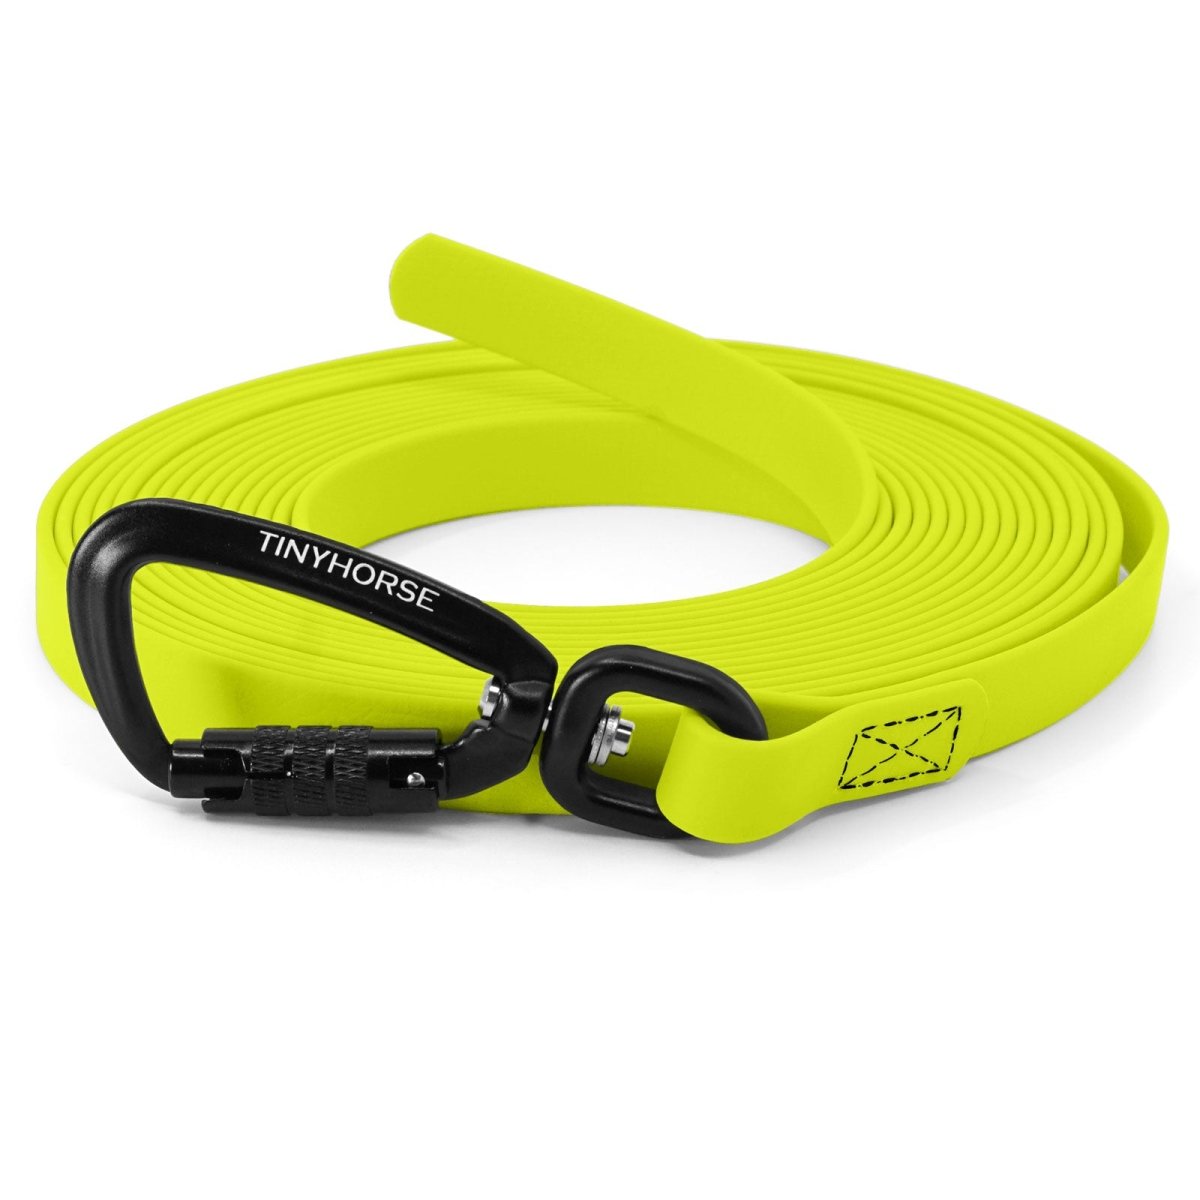 A neon yellow, handle-less long line with an auto-locking carabiner